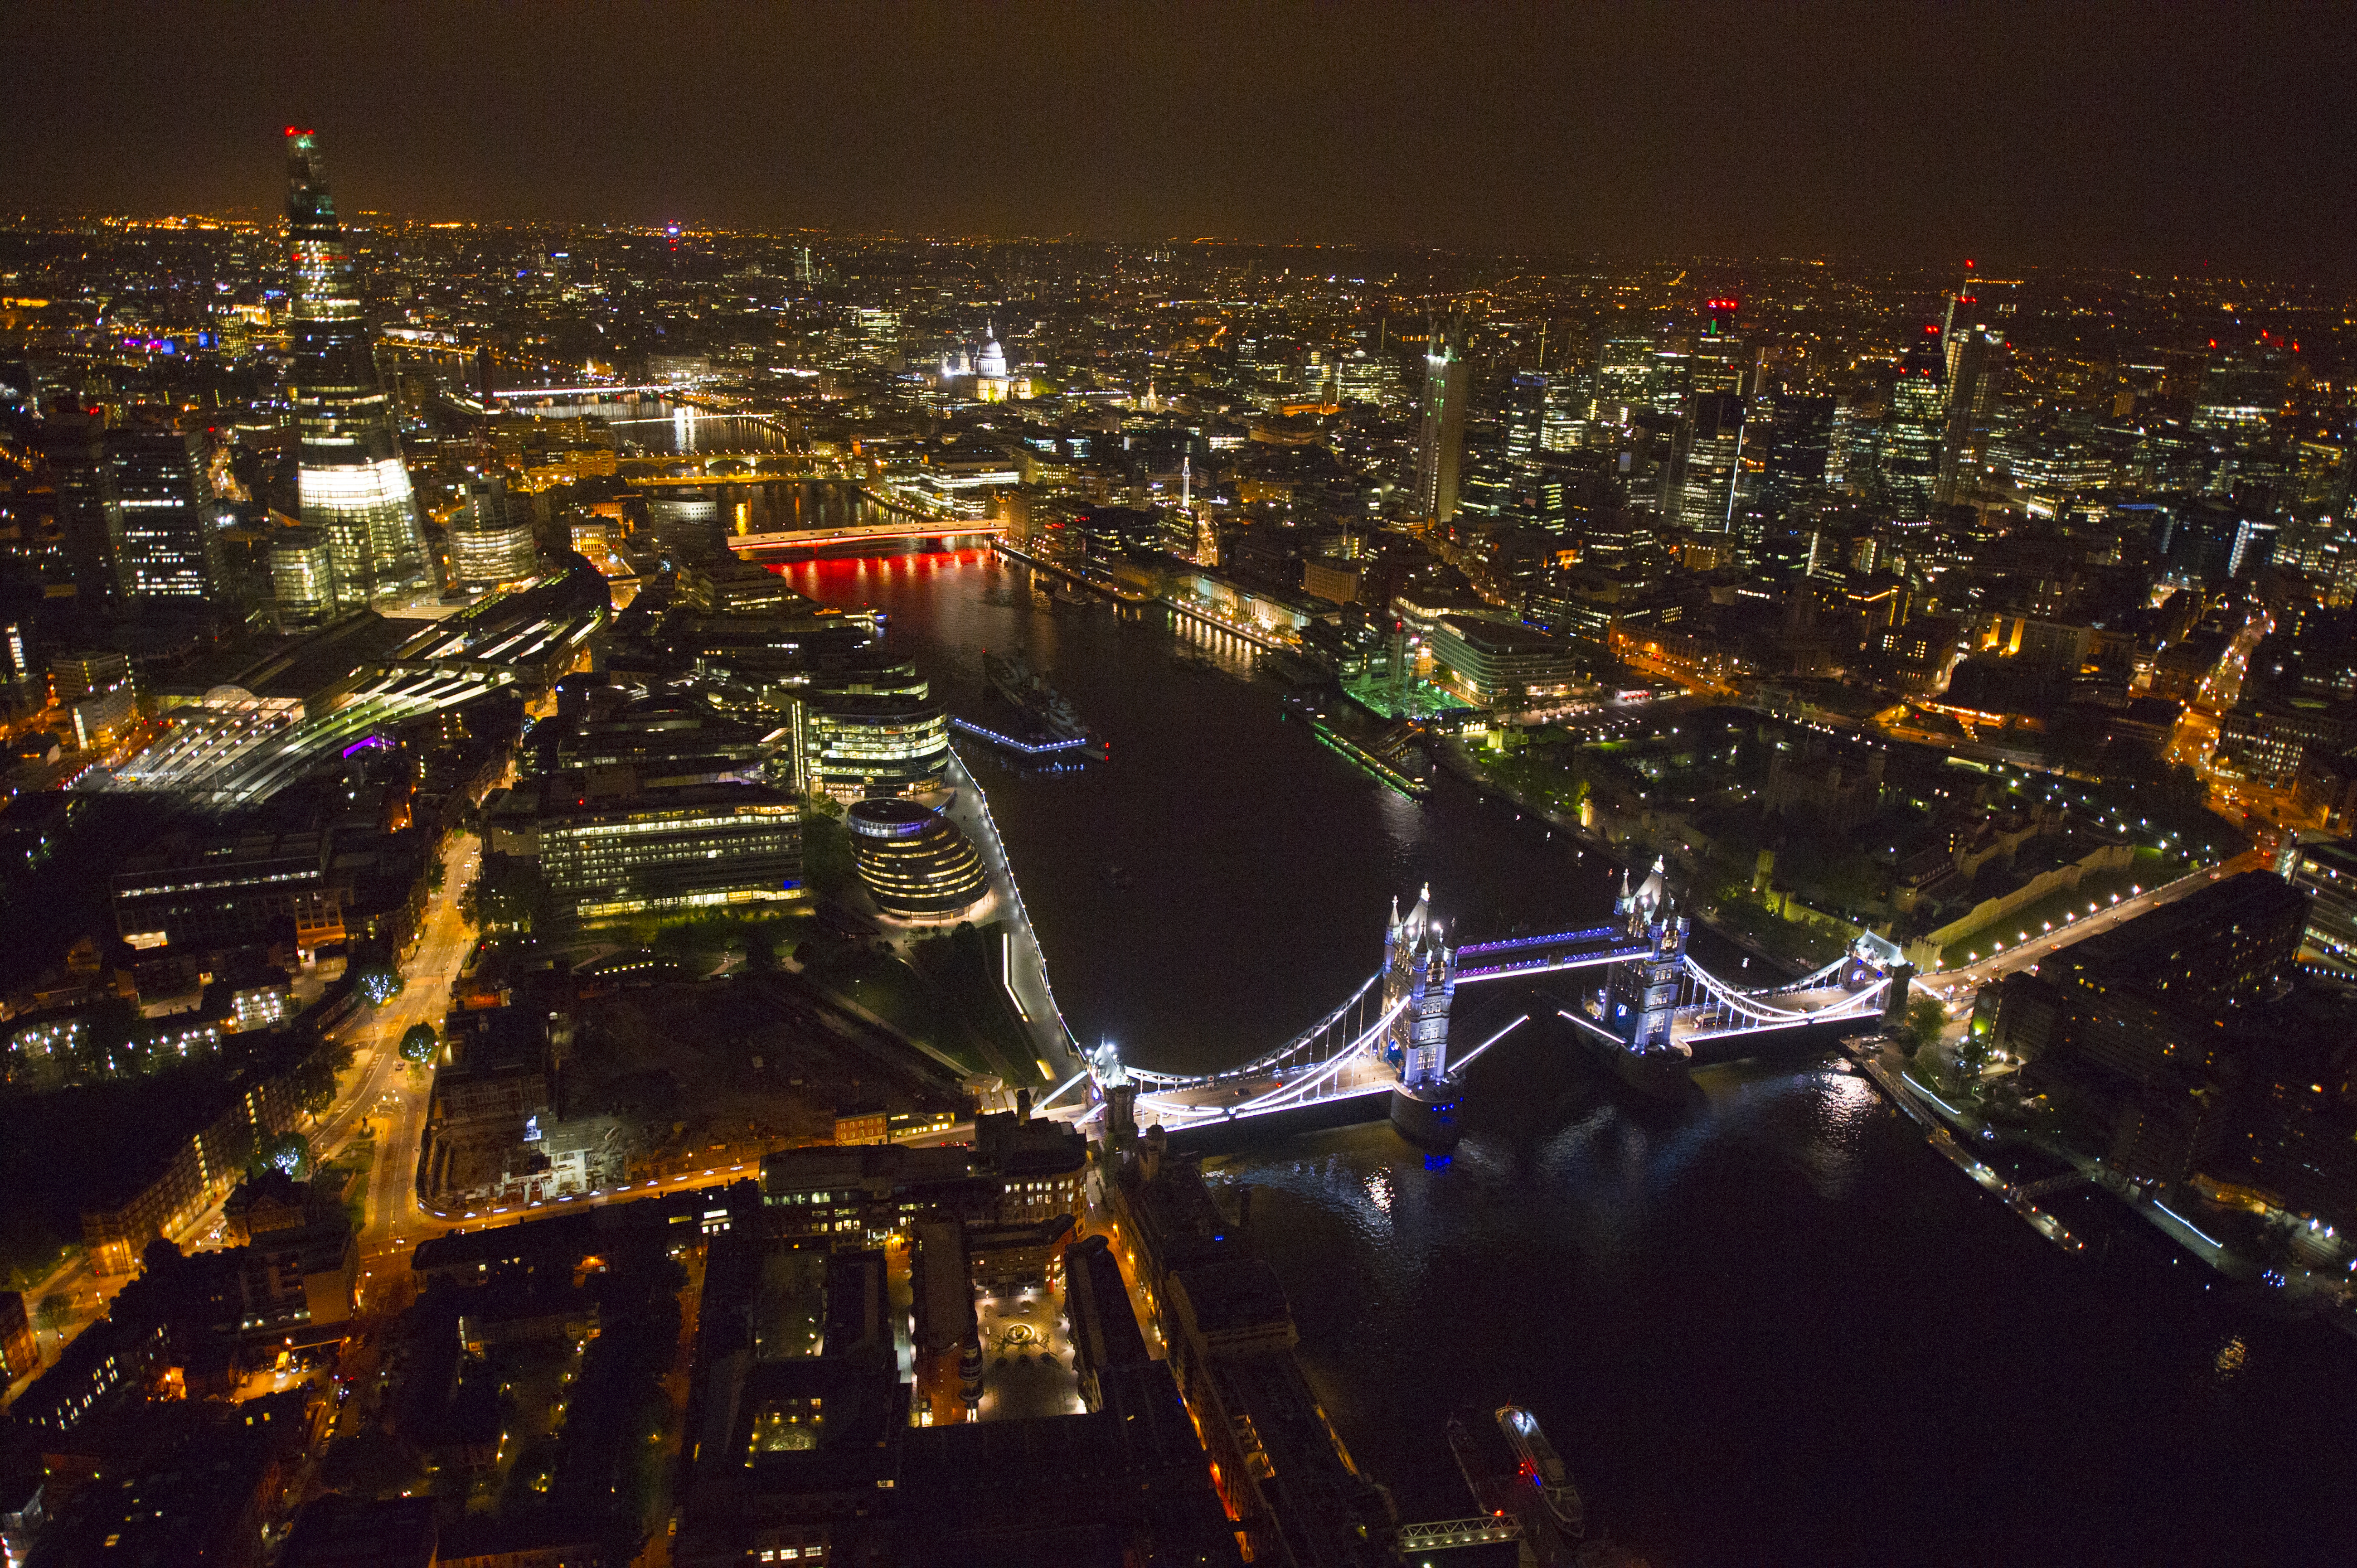 Photo: A Lovely Aerial Photo of London Taken At Night For Your ...